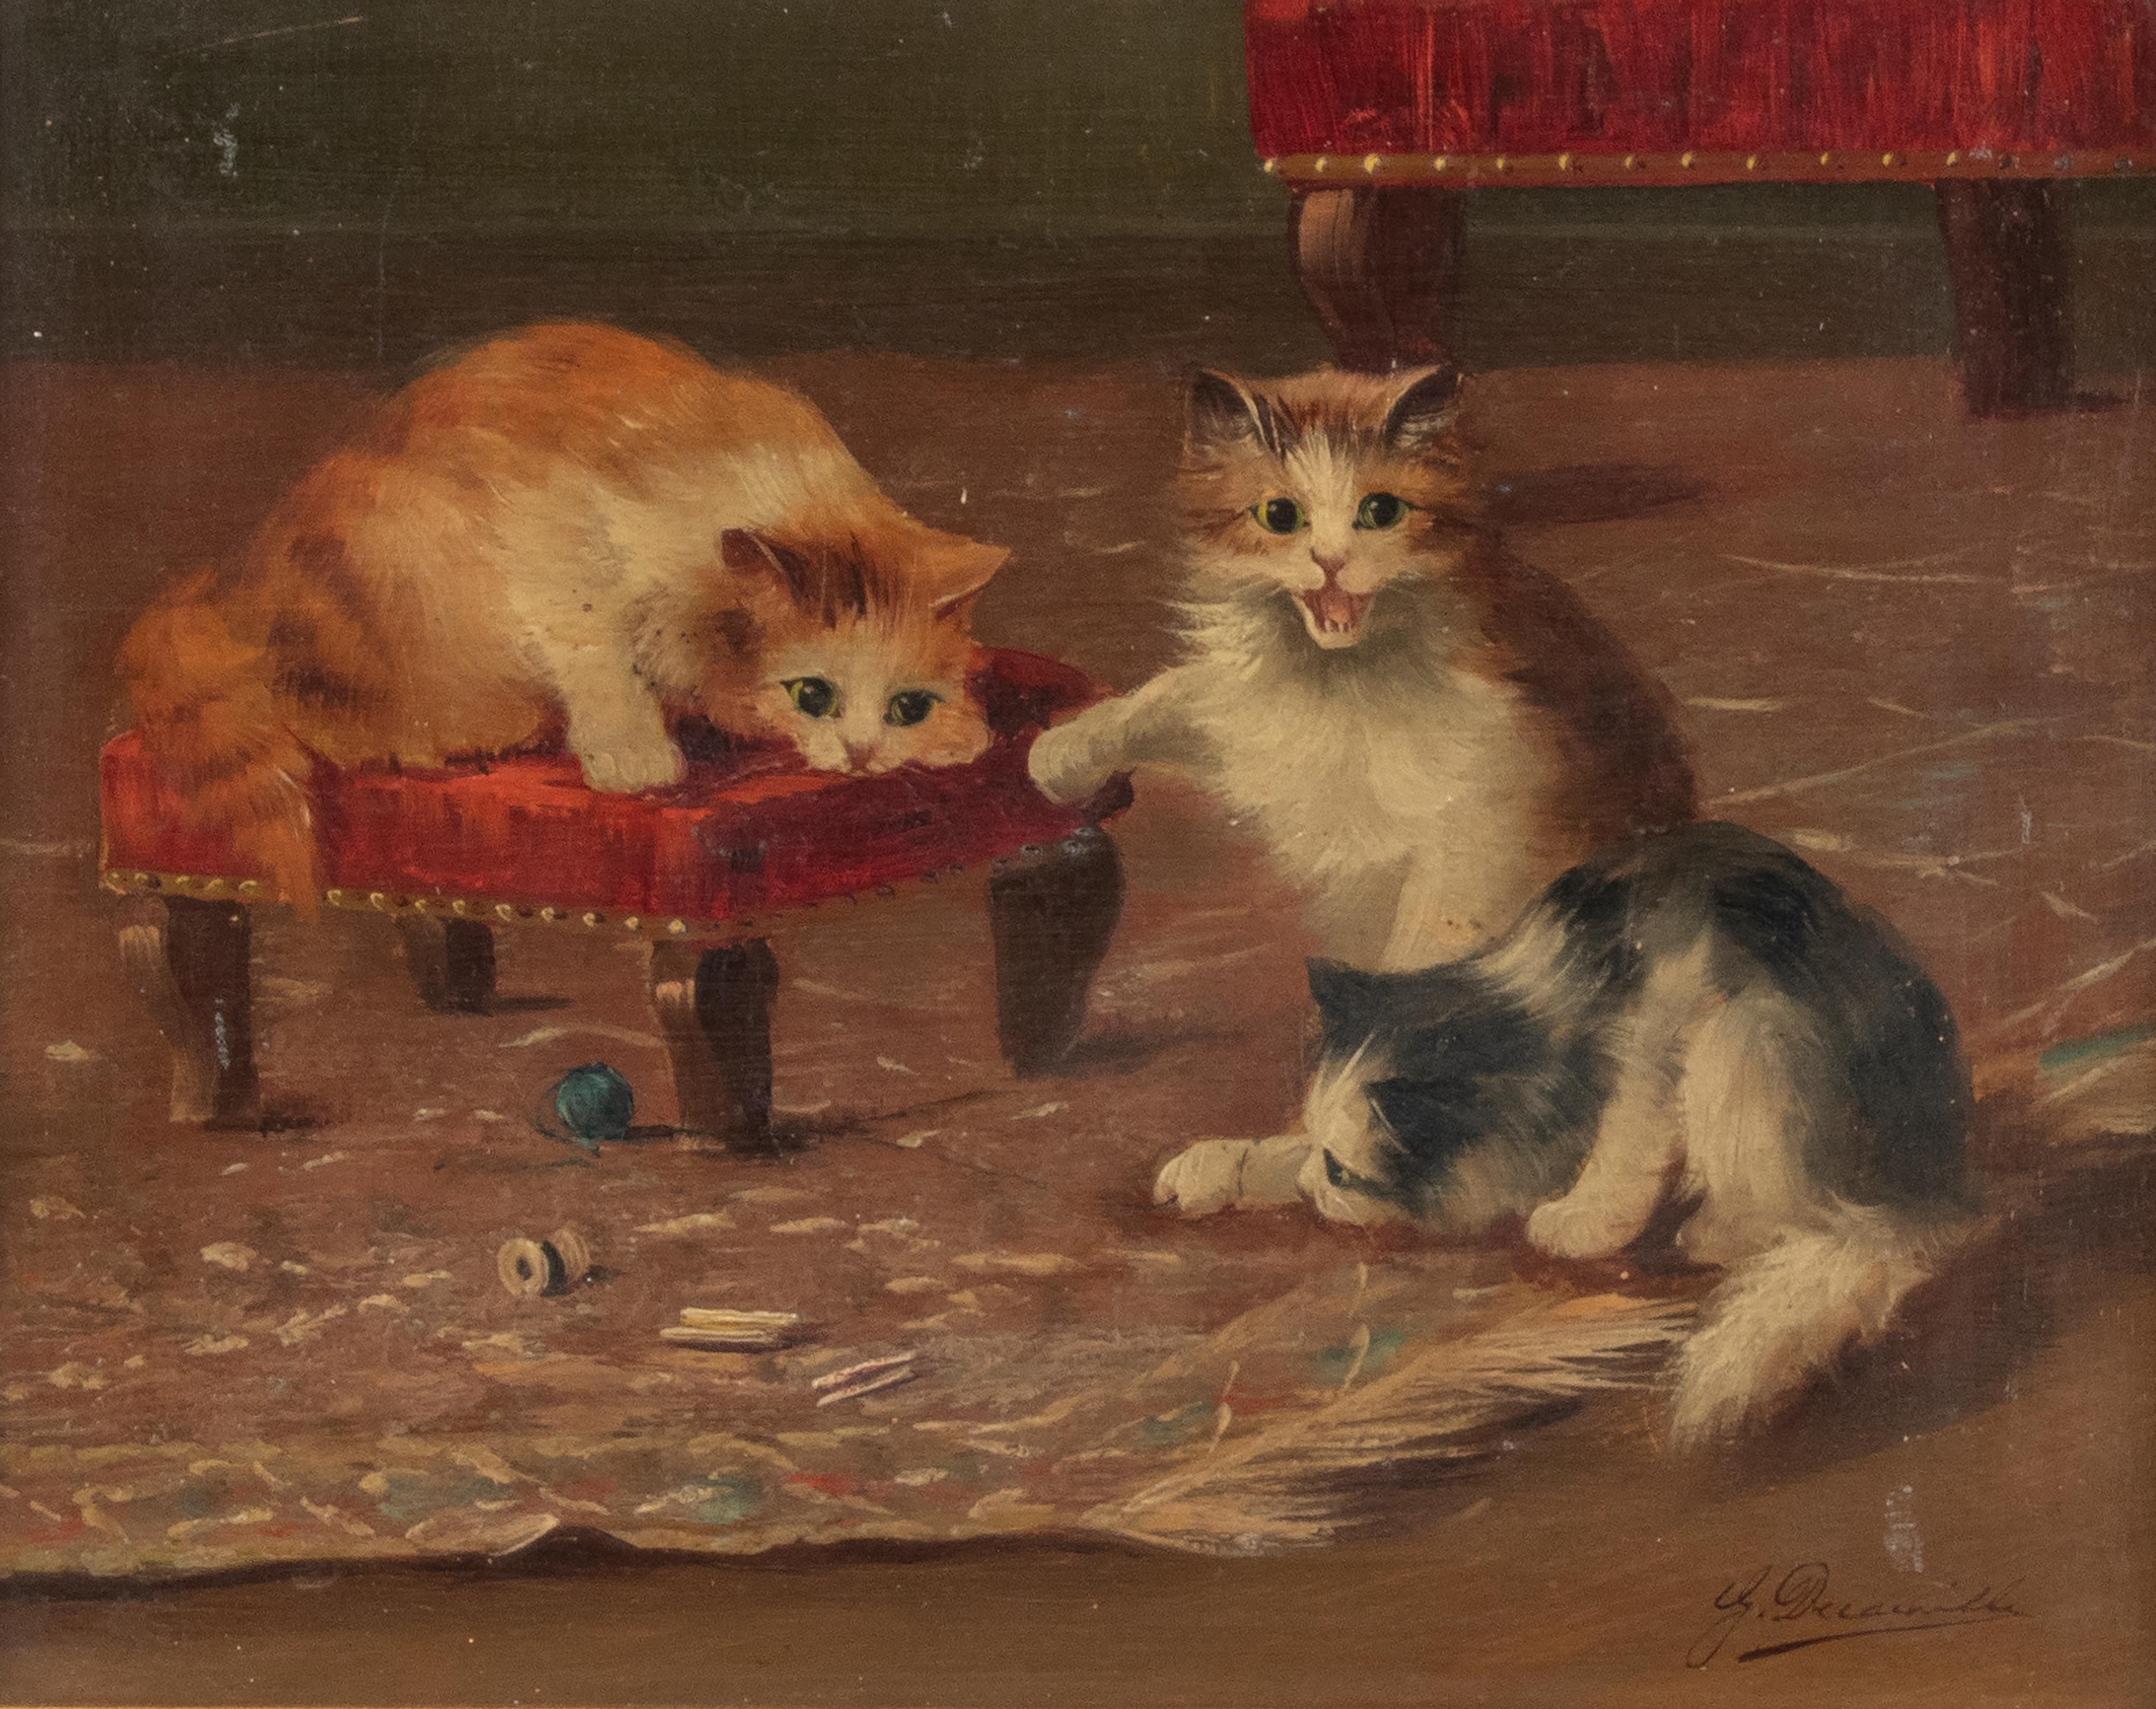 Cute painting of playing cats. The painting dates from circa 1910-1920, presumably French. The painting is signed at the bottom right, but the signature is not clearly legible. The painting is in good condition and is framed in a wooden frame. The